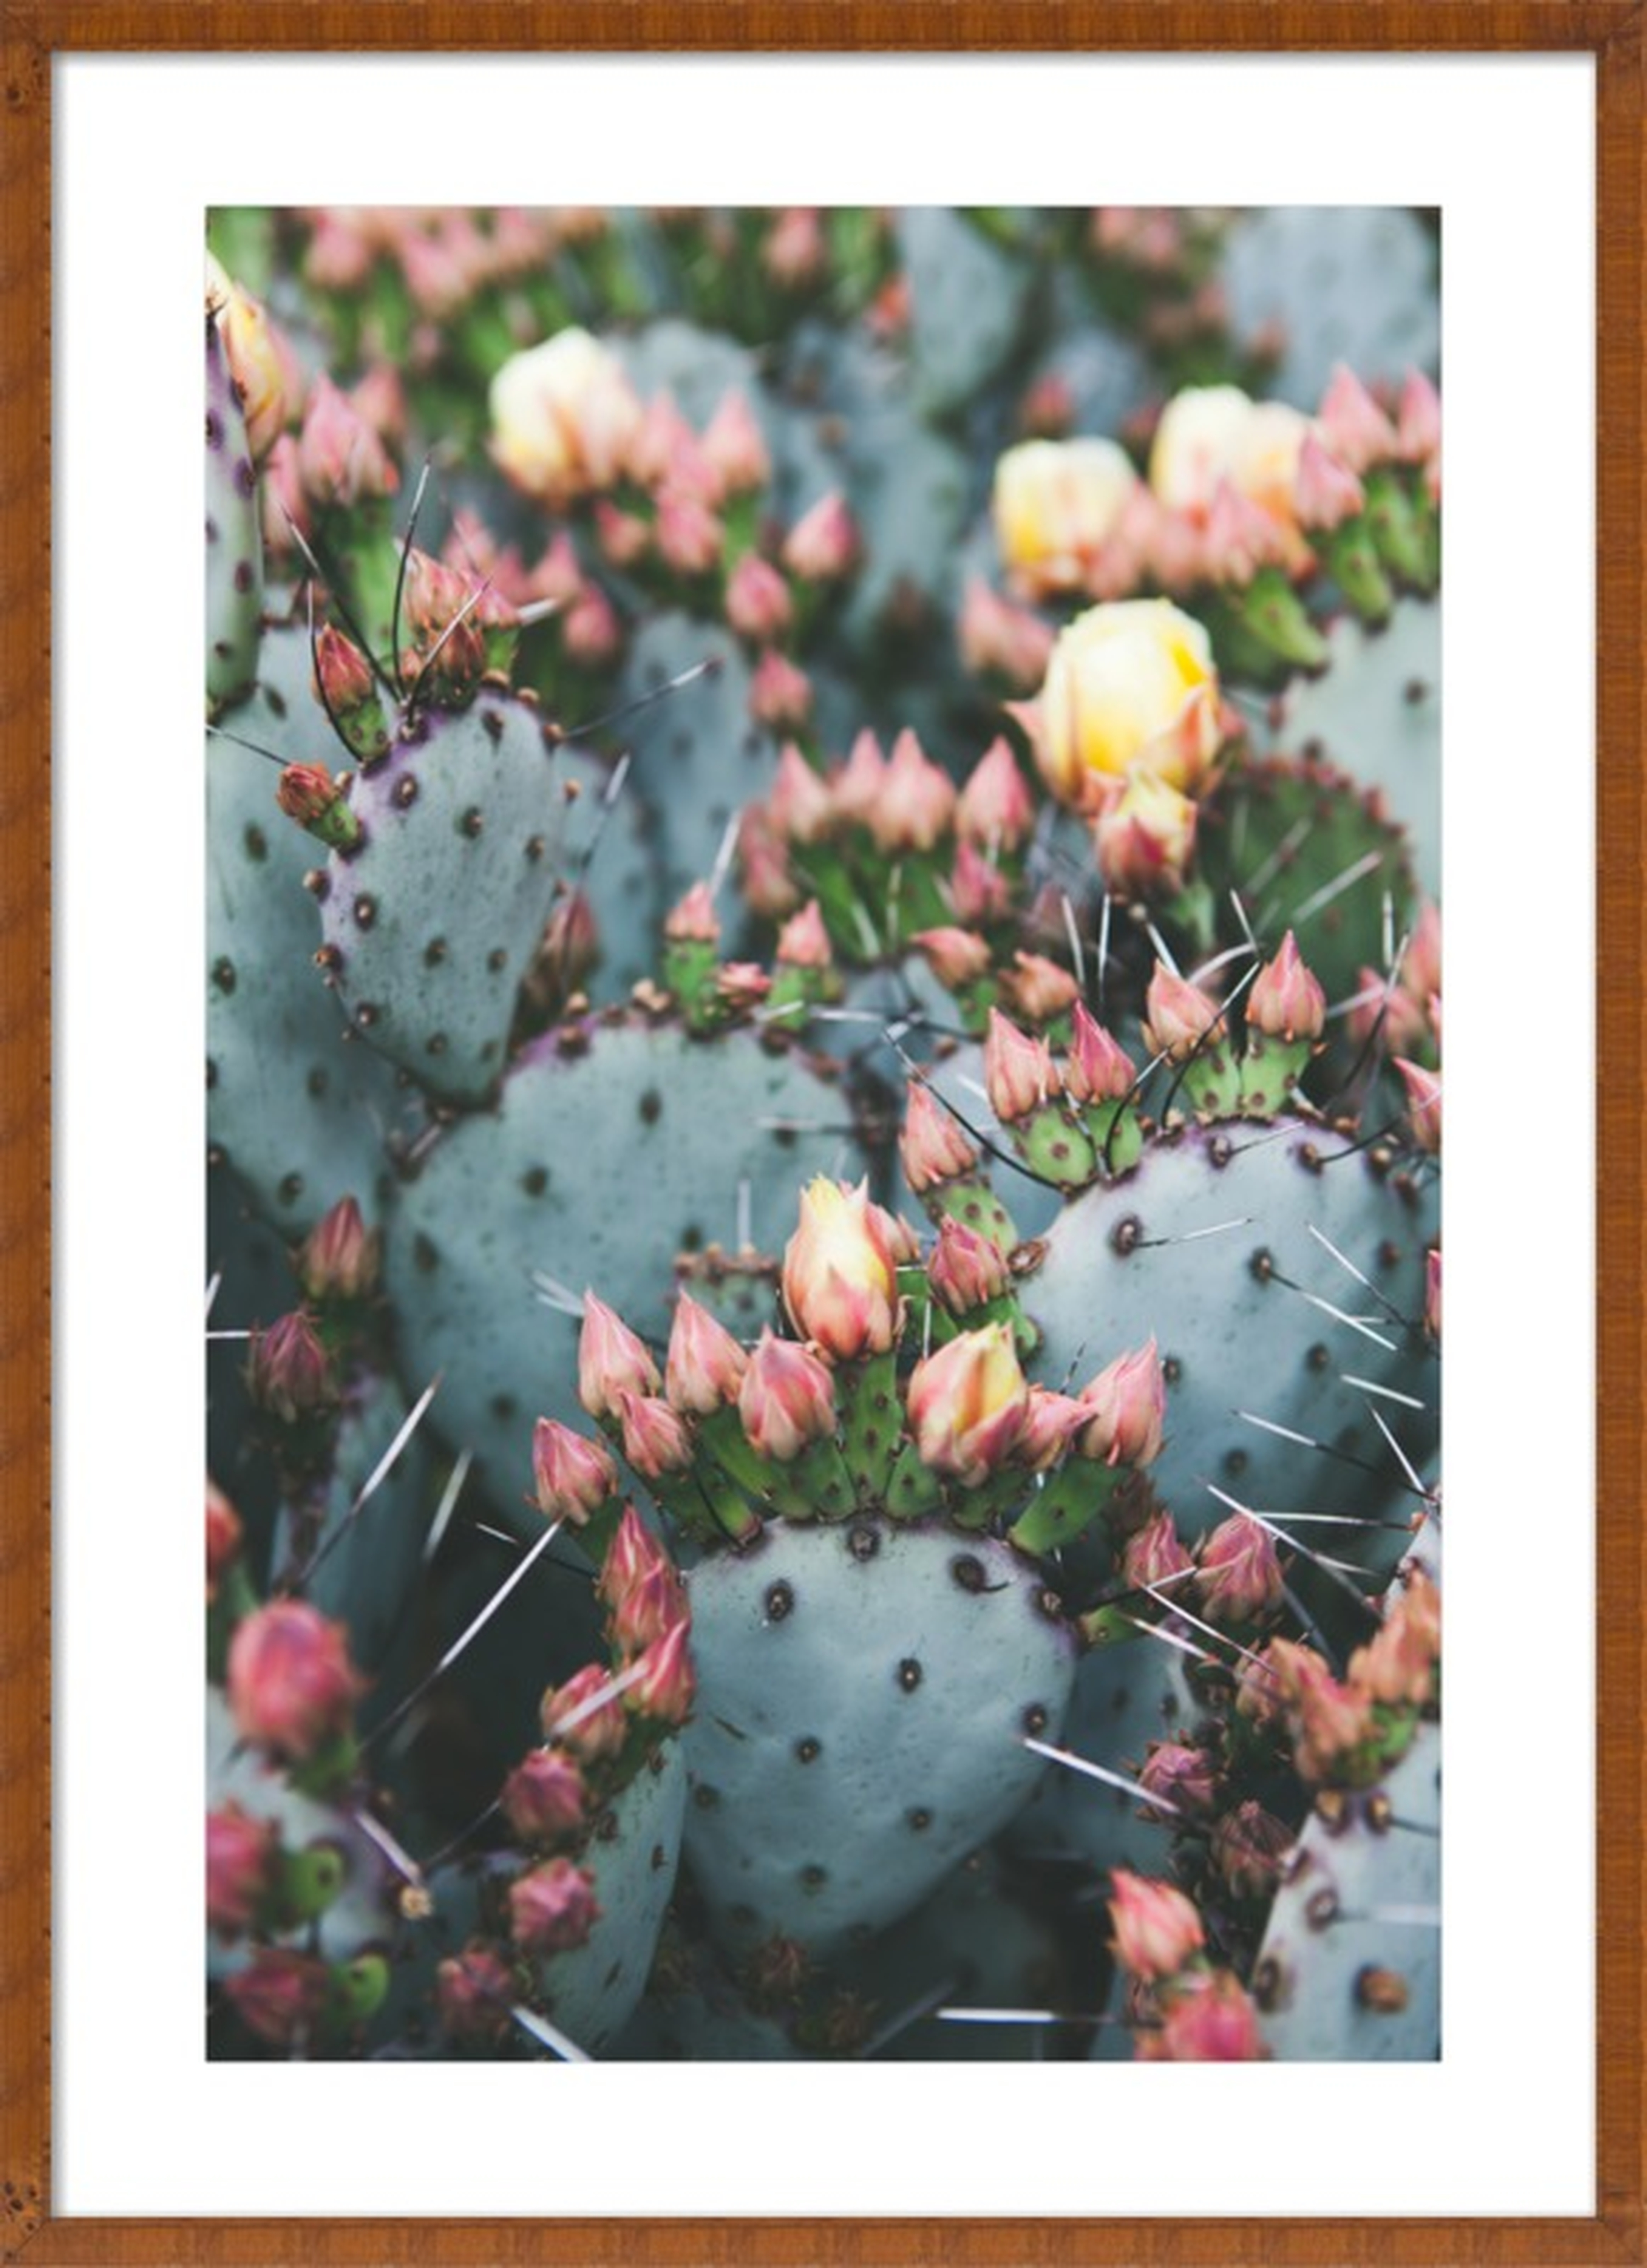 Prickly Pear by Catherine McDonald for Artfully Walls - Artfully Walls